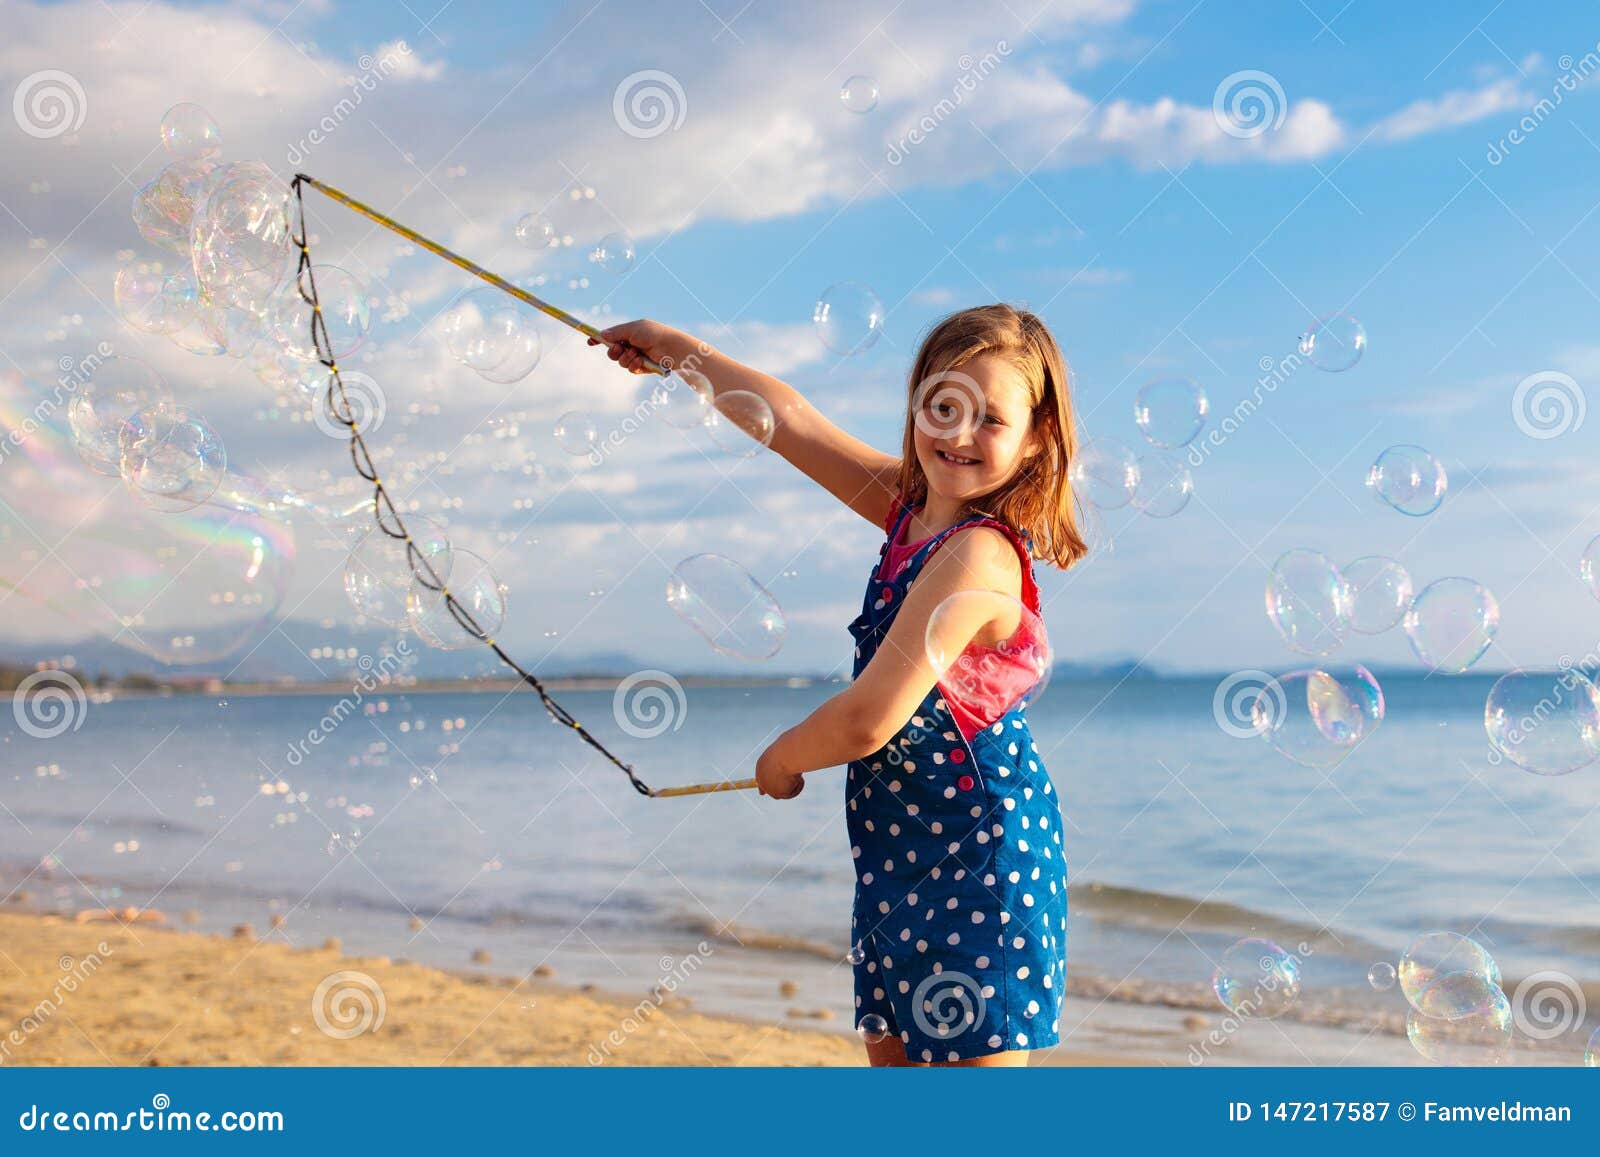 Kids Blow Bubble At Beach Child With Bubbles Stock Image Image